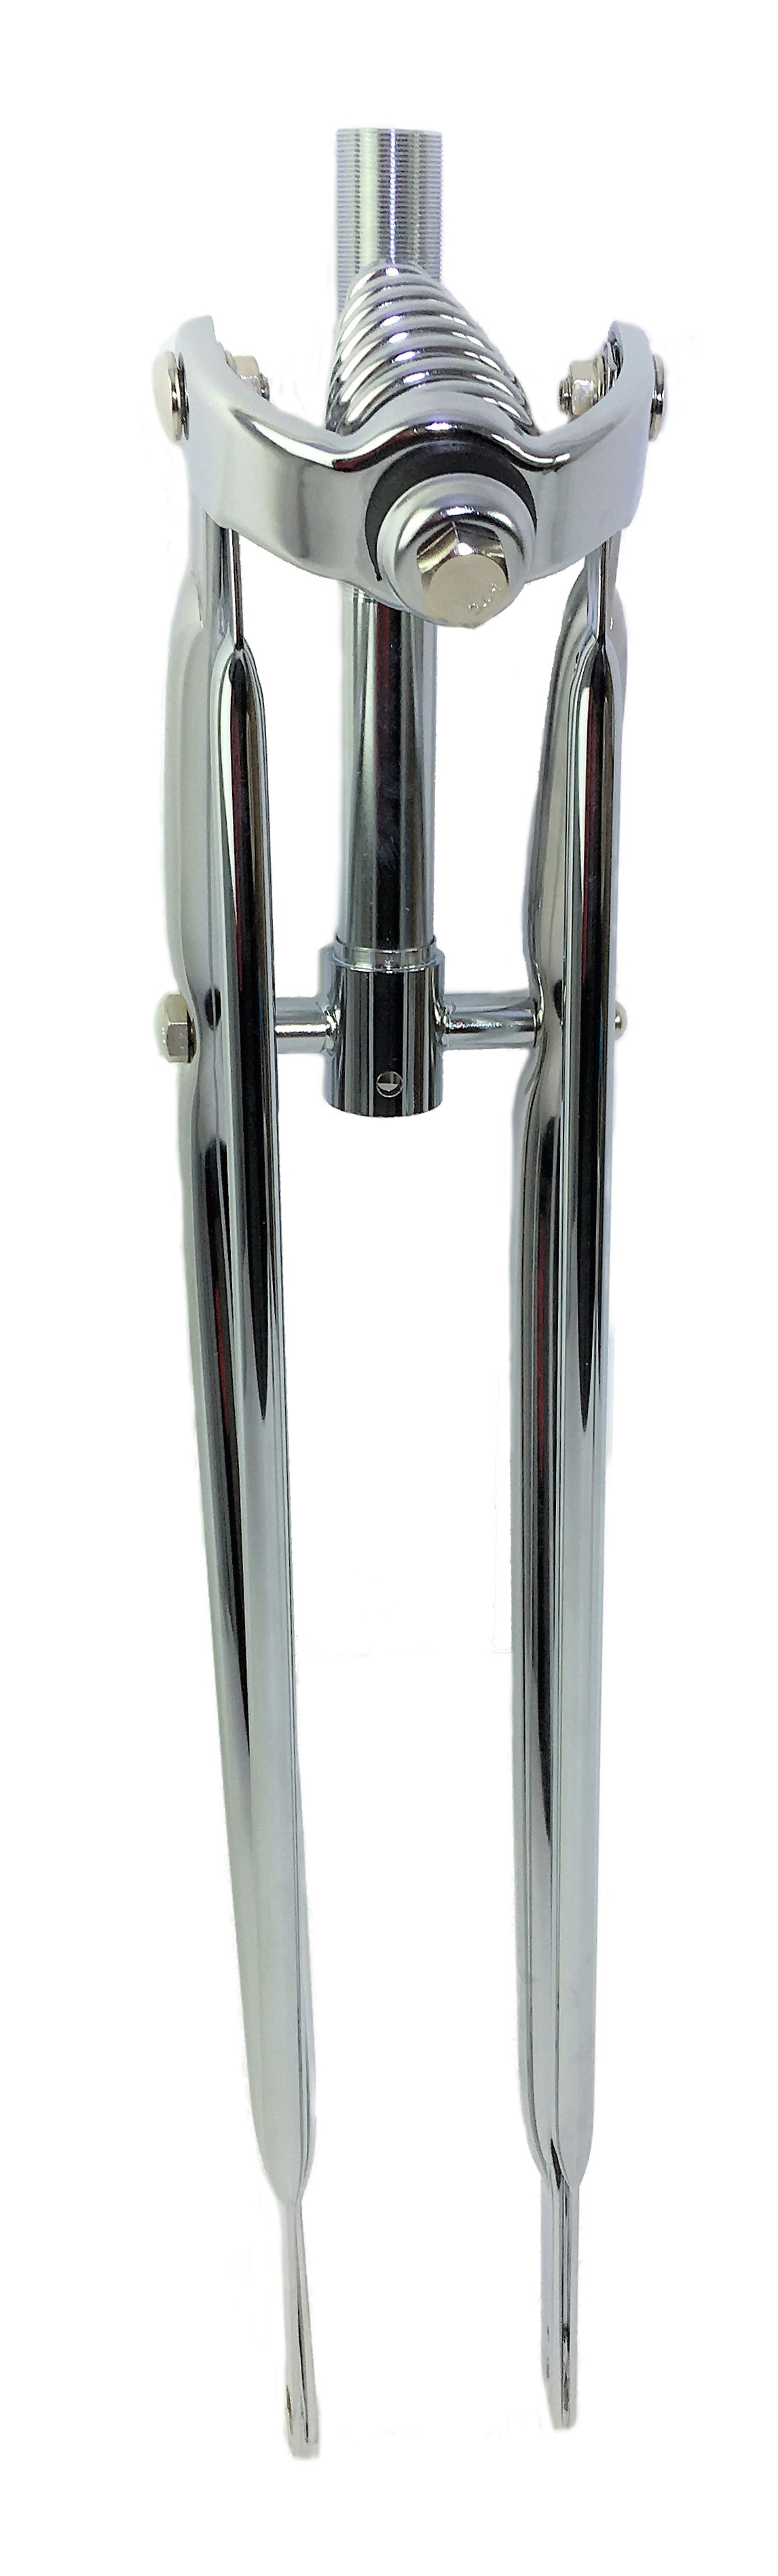 Springer Fork 28 inch. without Cantilevers